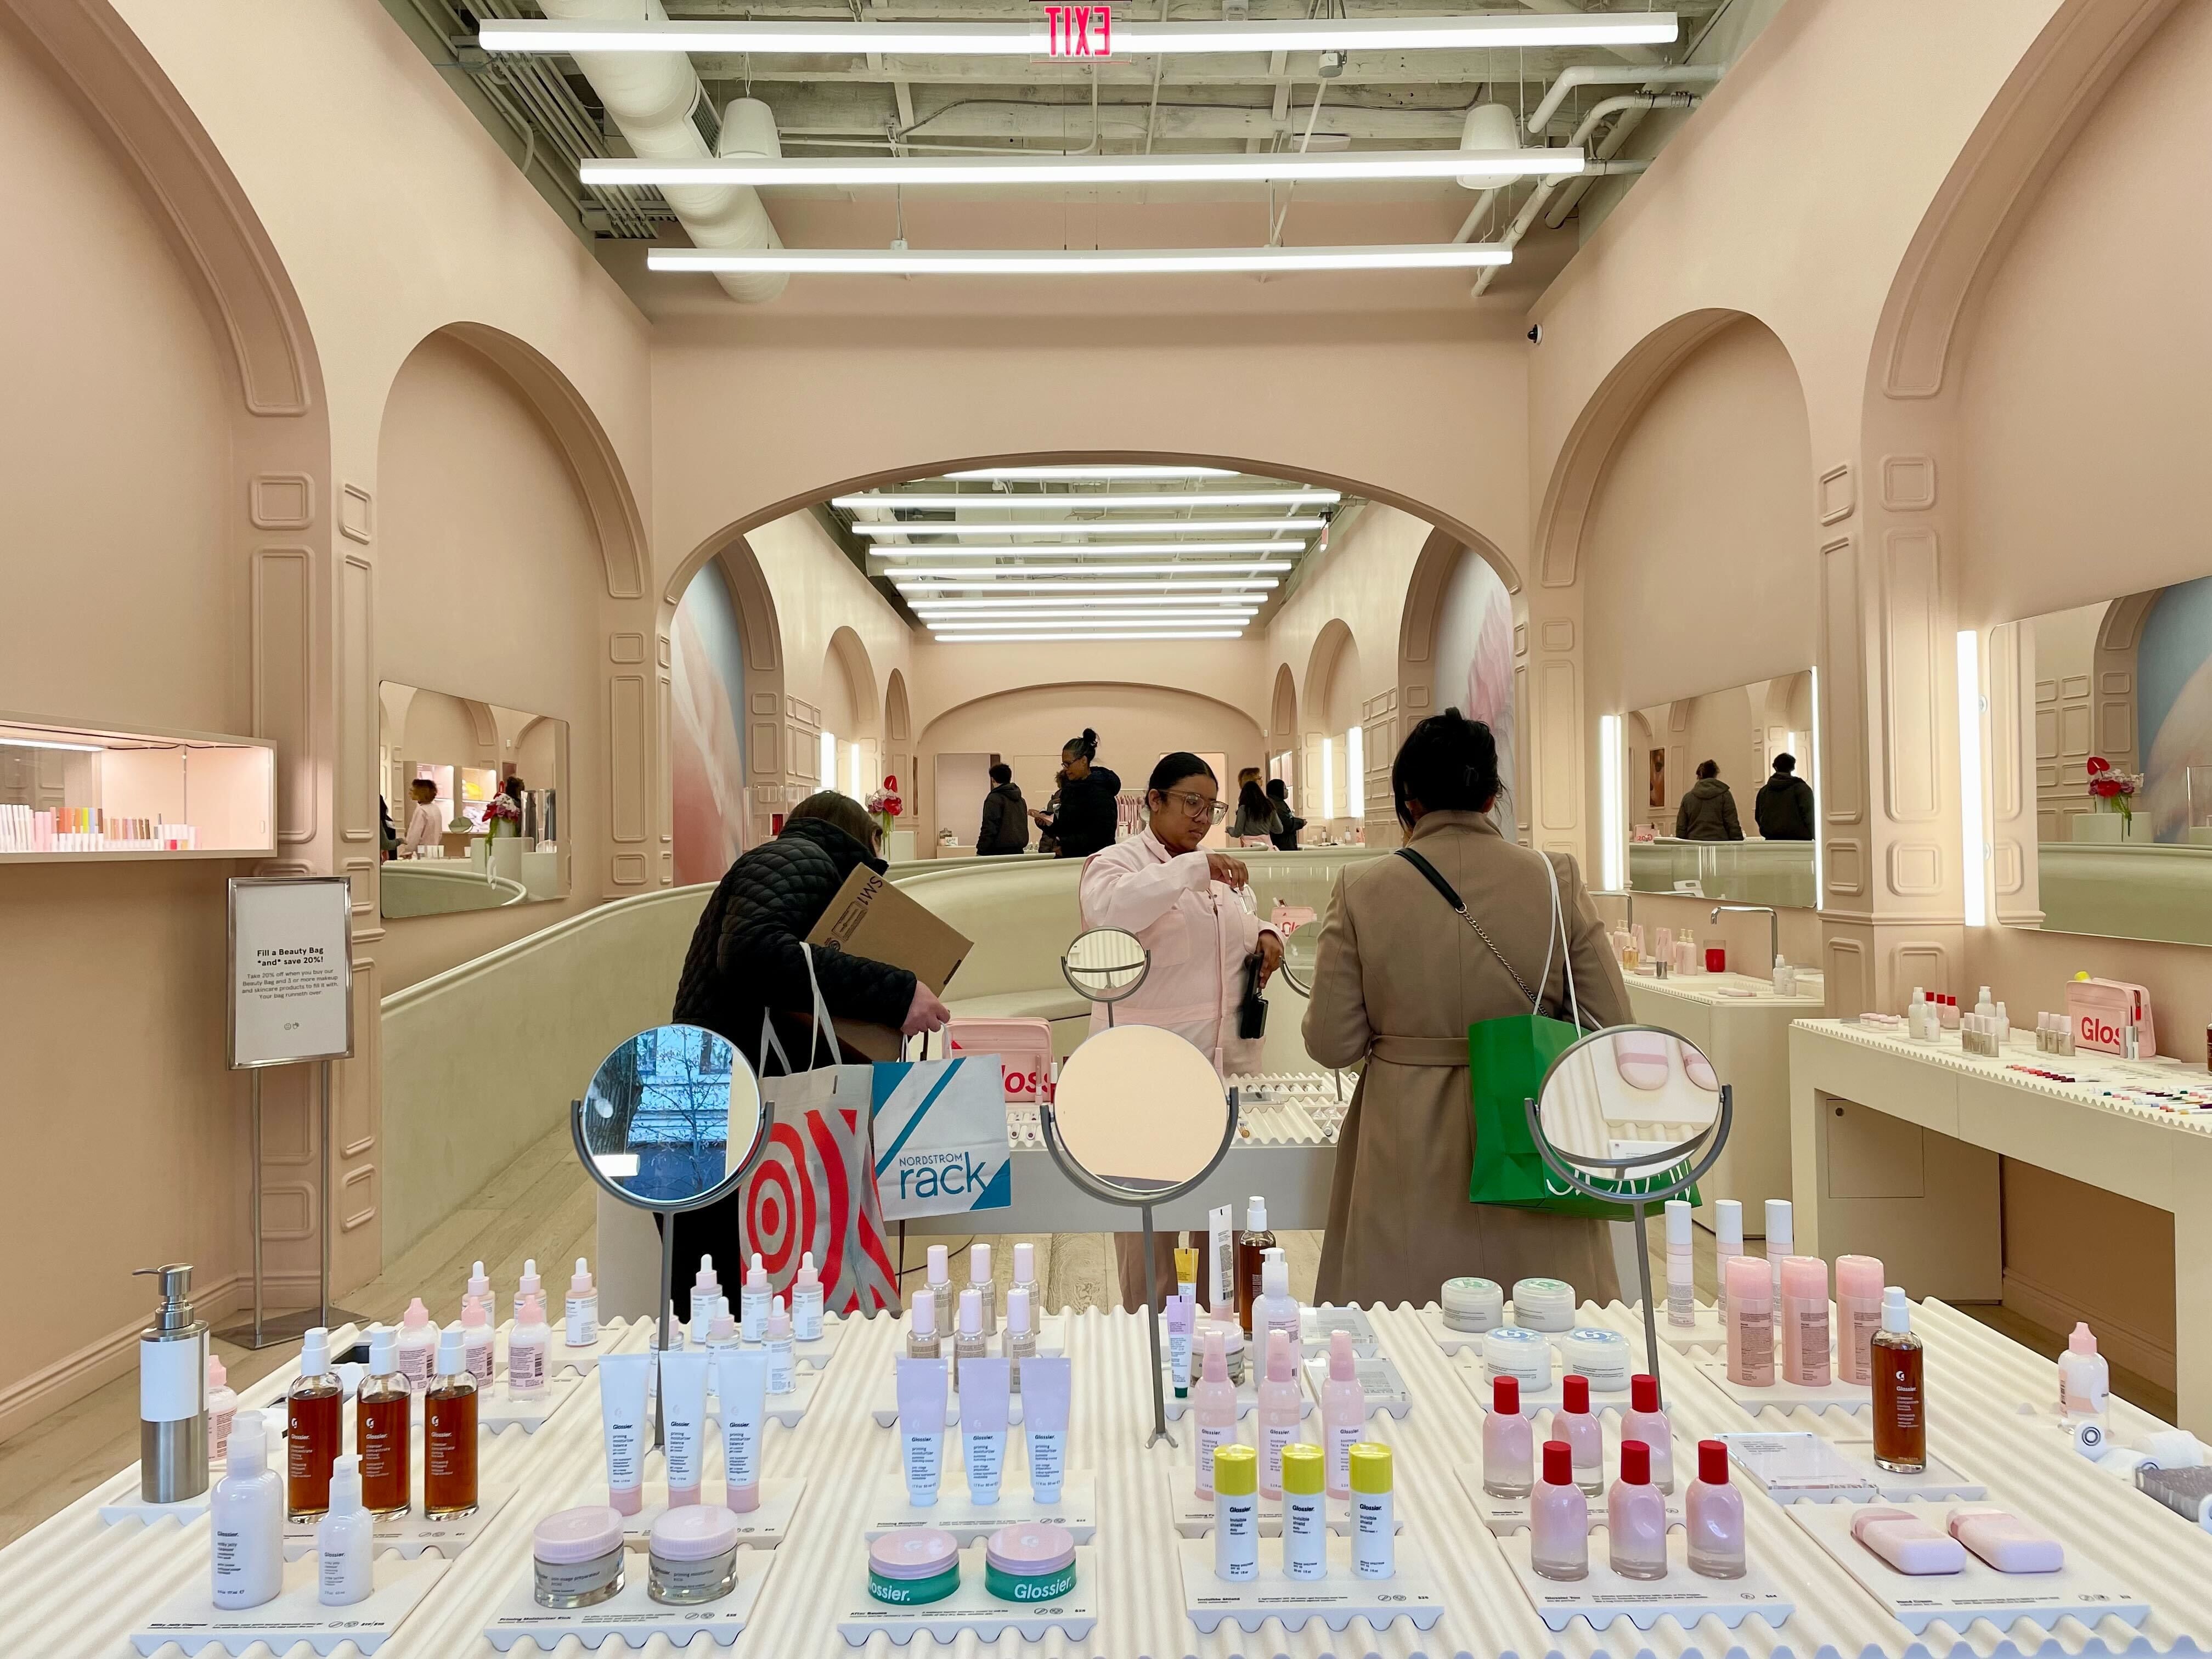 What to know about Glossier's new Philly store in Rittenhouse Square